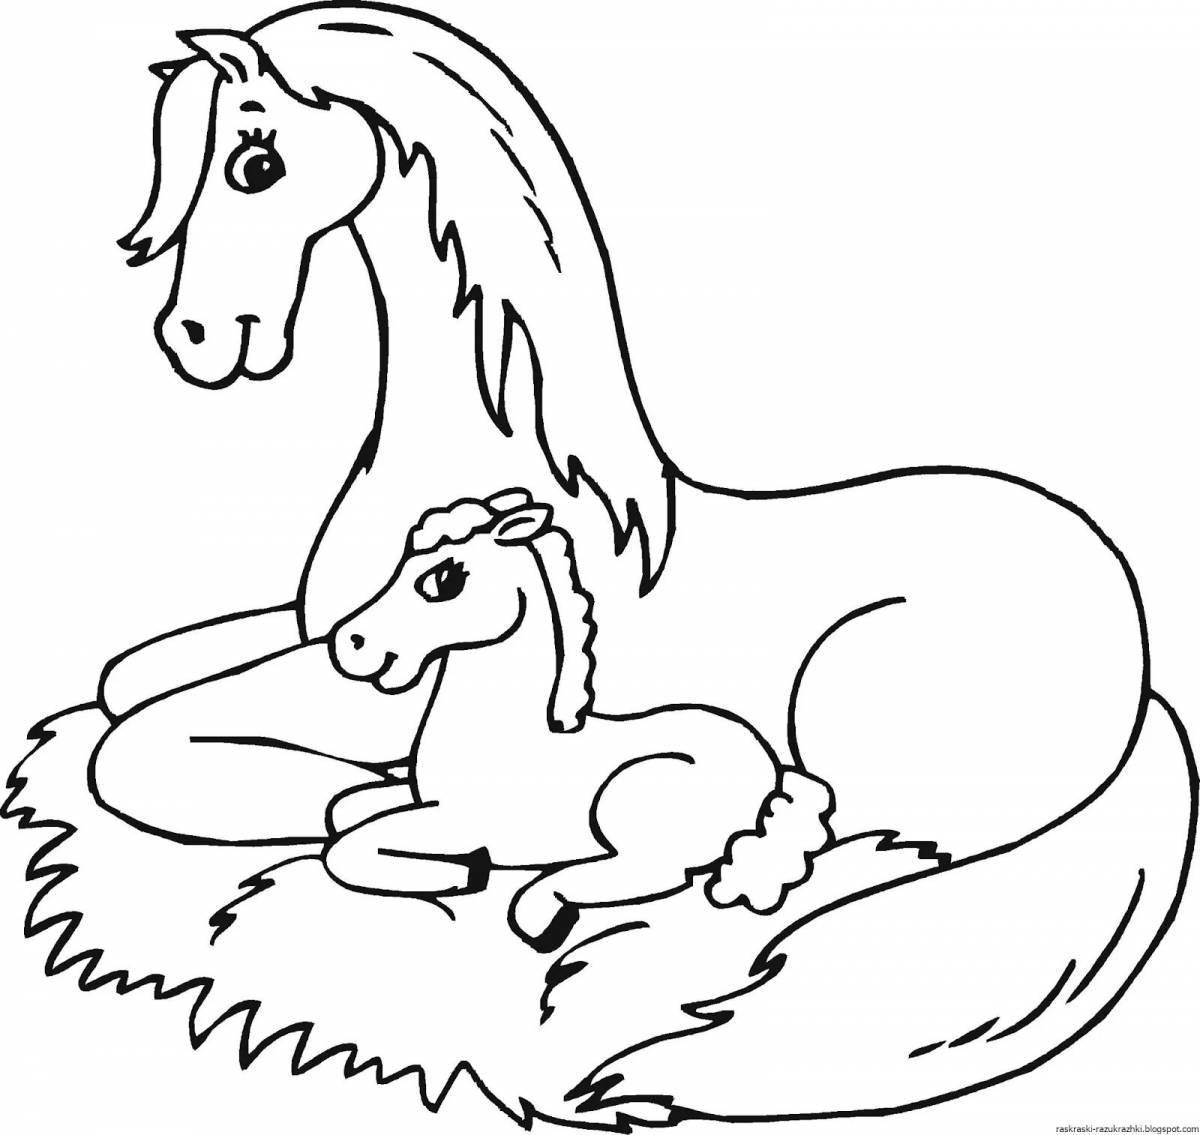 Glitter horse coloring book for children 4-5 years old